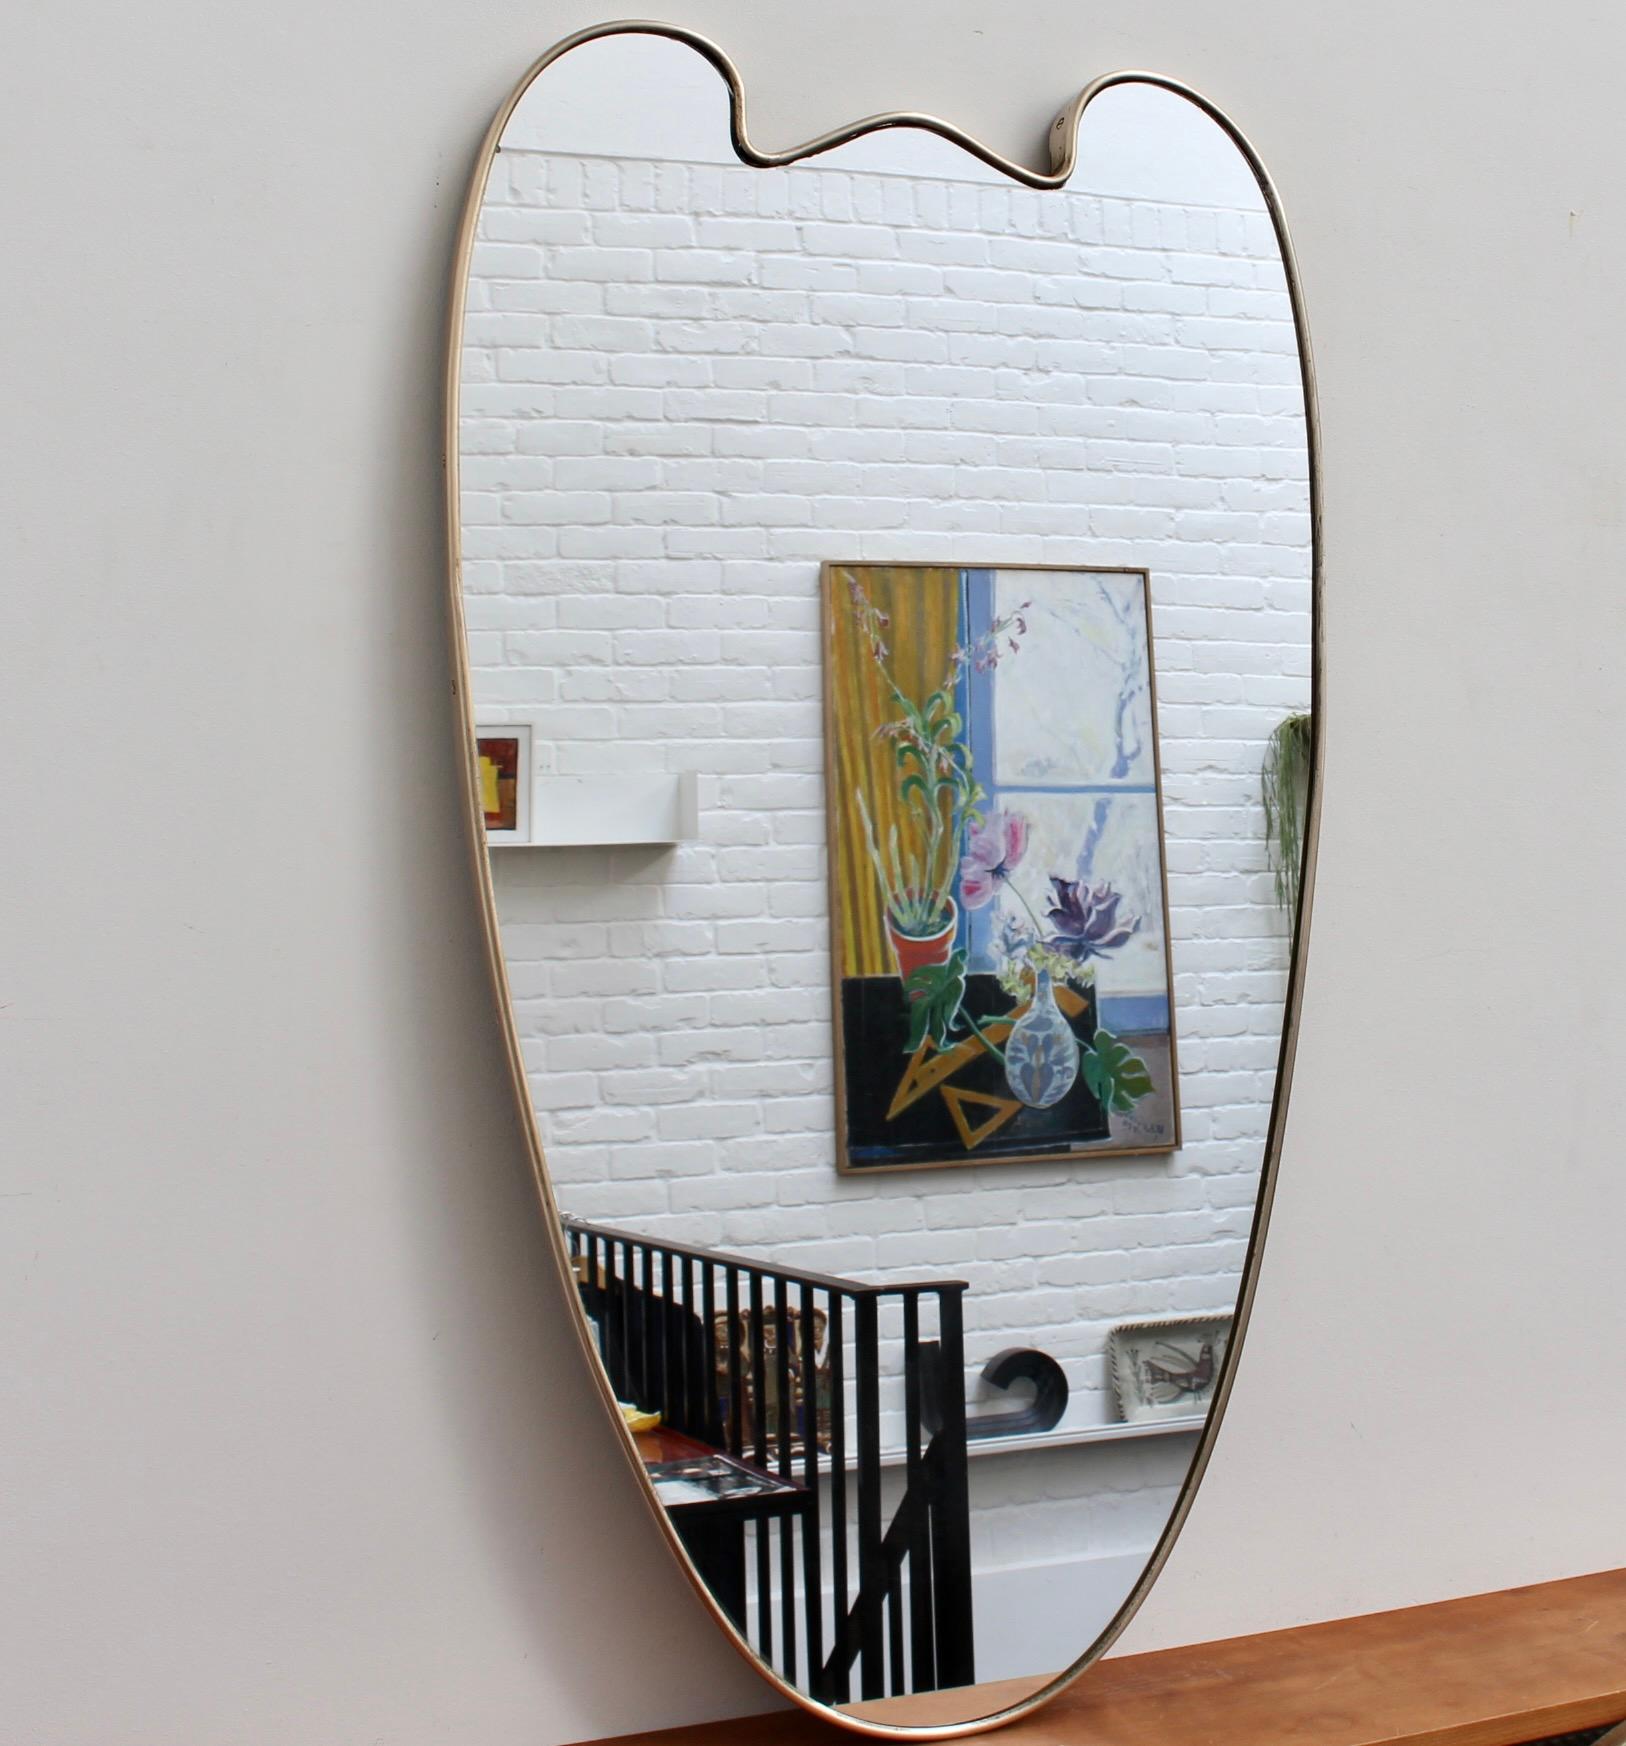 Large mid-century Italian wall mirror with brass frame (circa 1950s). The mirror is classically-shaped and distinctive in a Gio Ponti style. This mirror is in good overall condition. There are some characterful blemishes and a beautiful patina on